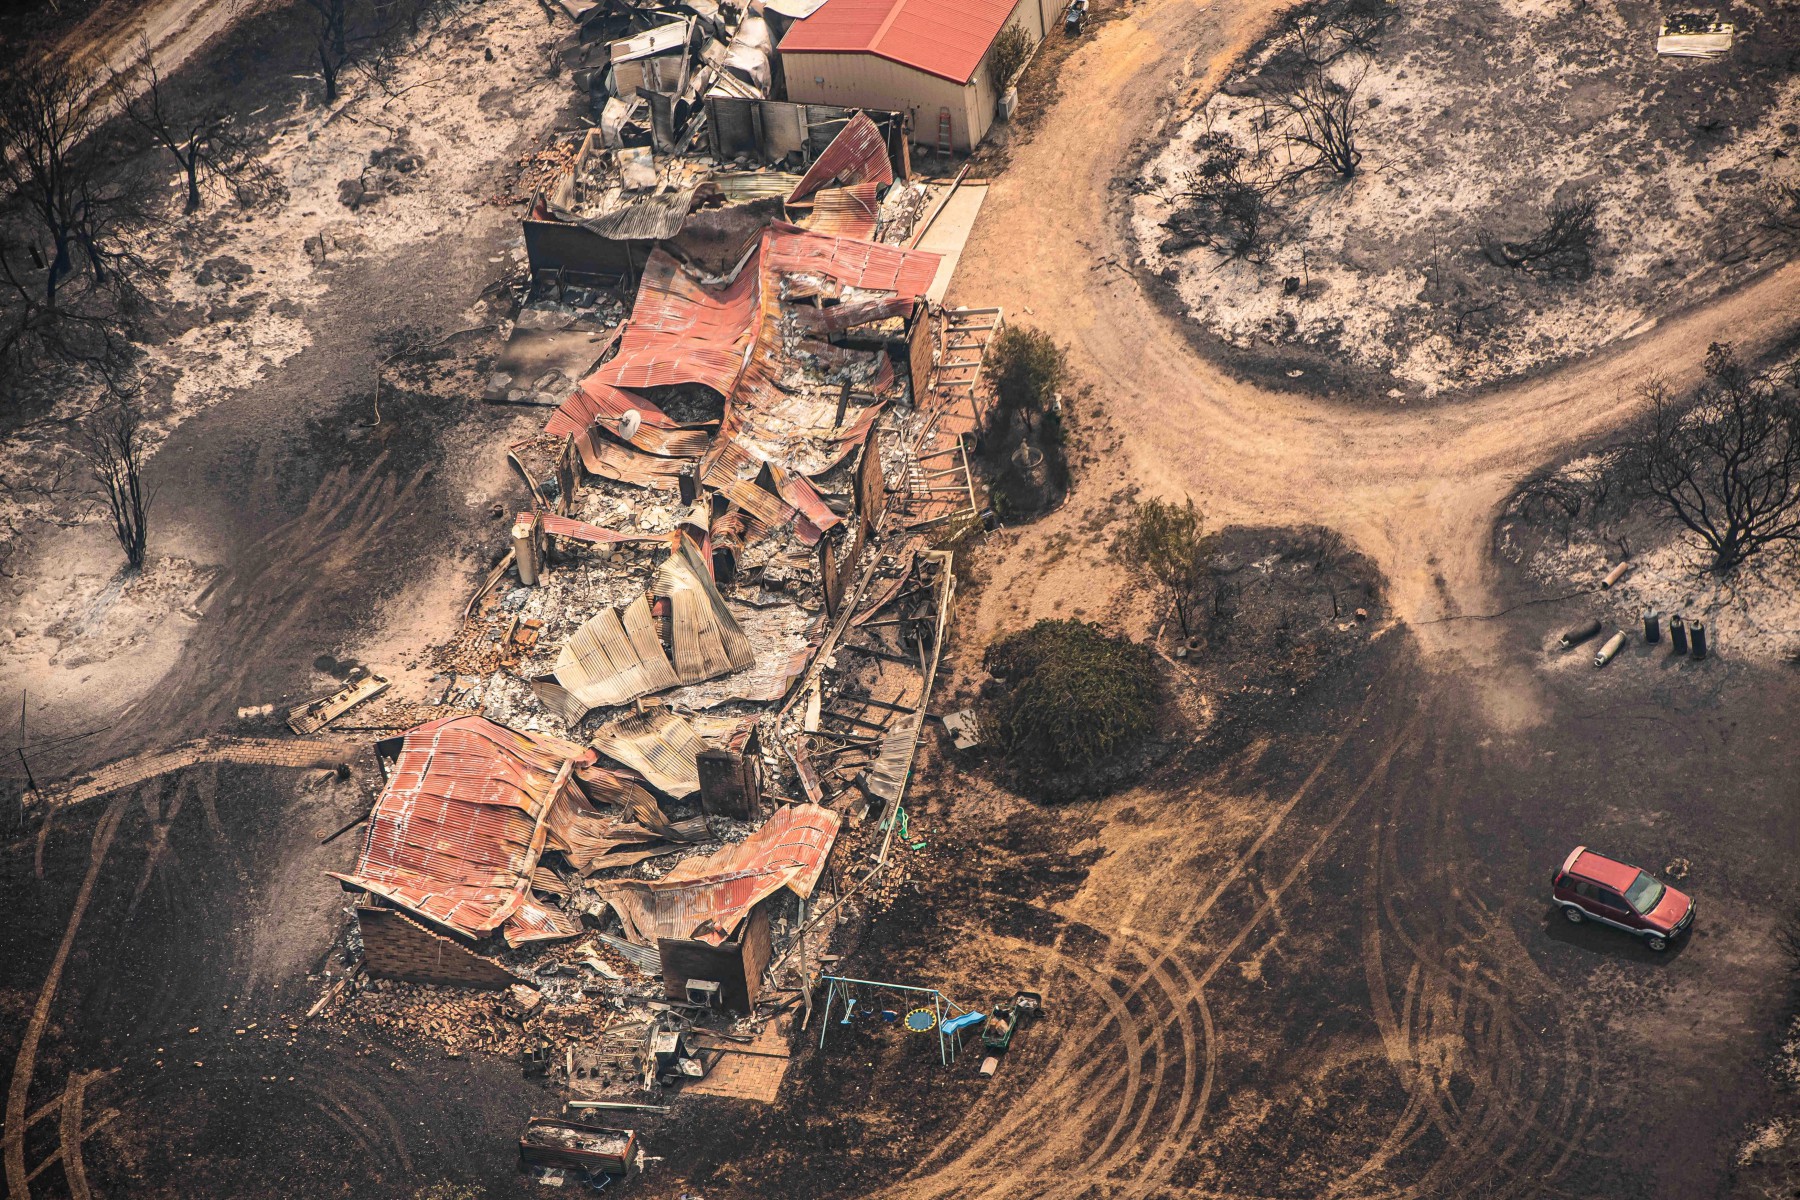  The fires have destroyed some 1,200 homes across Australia